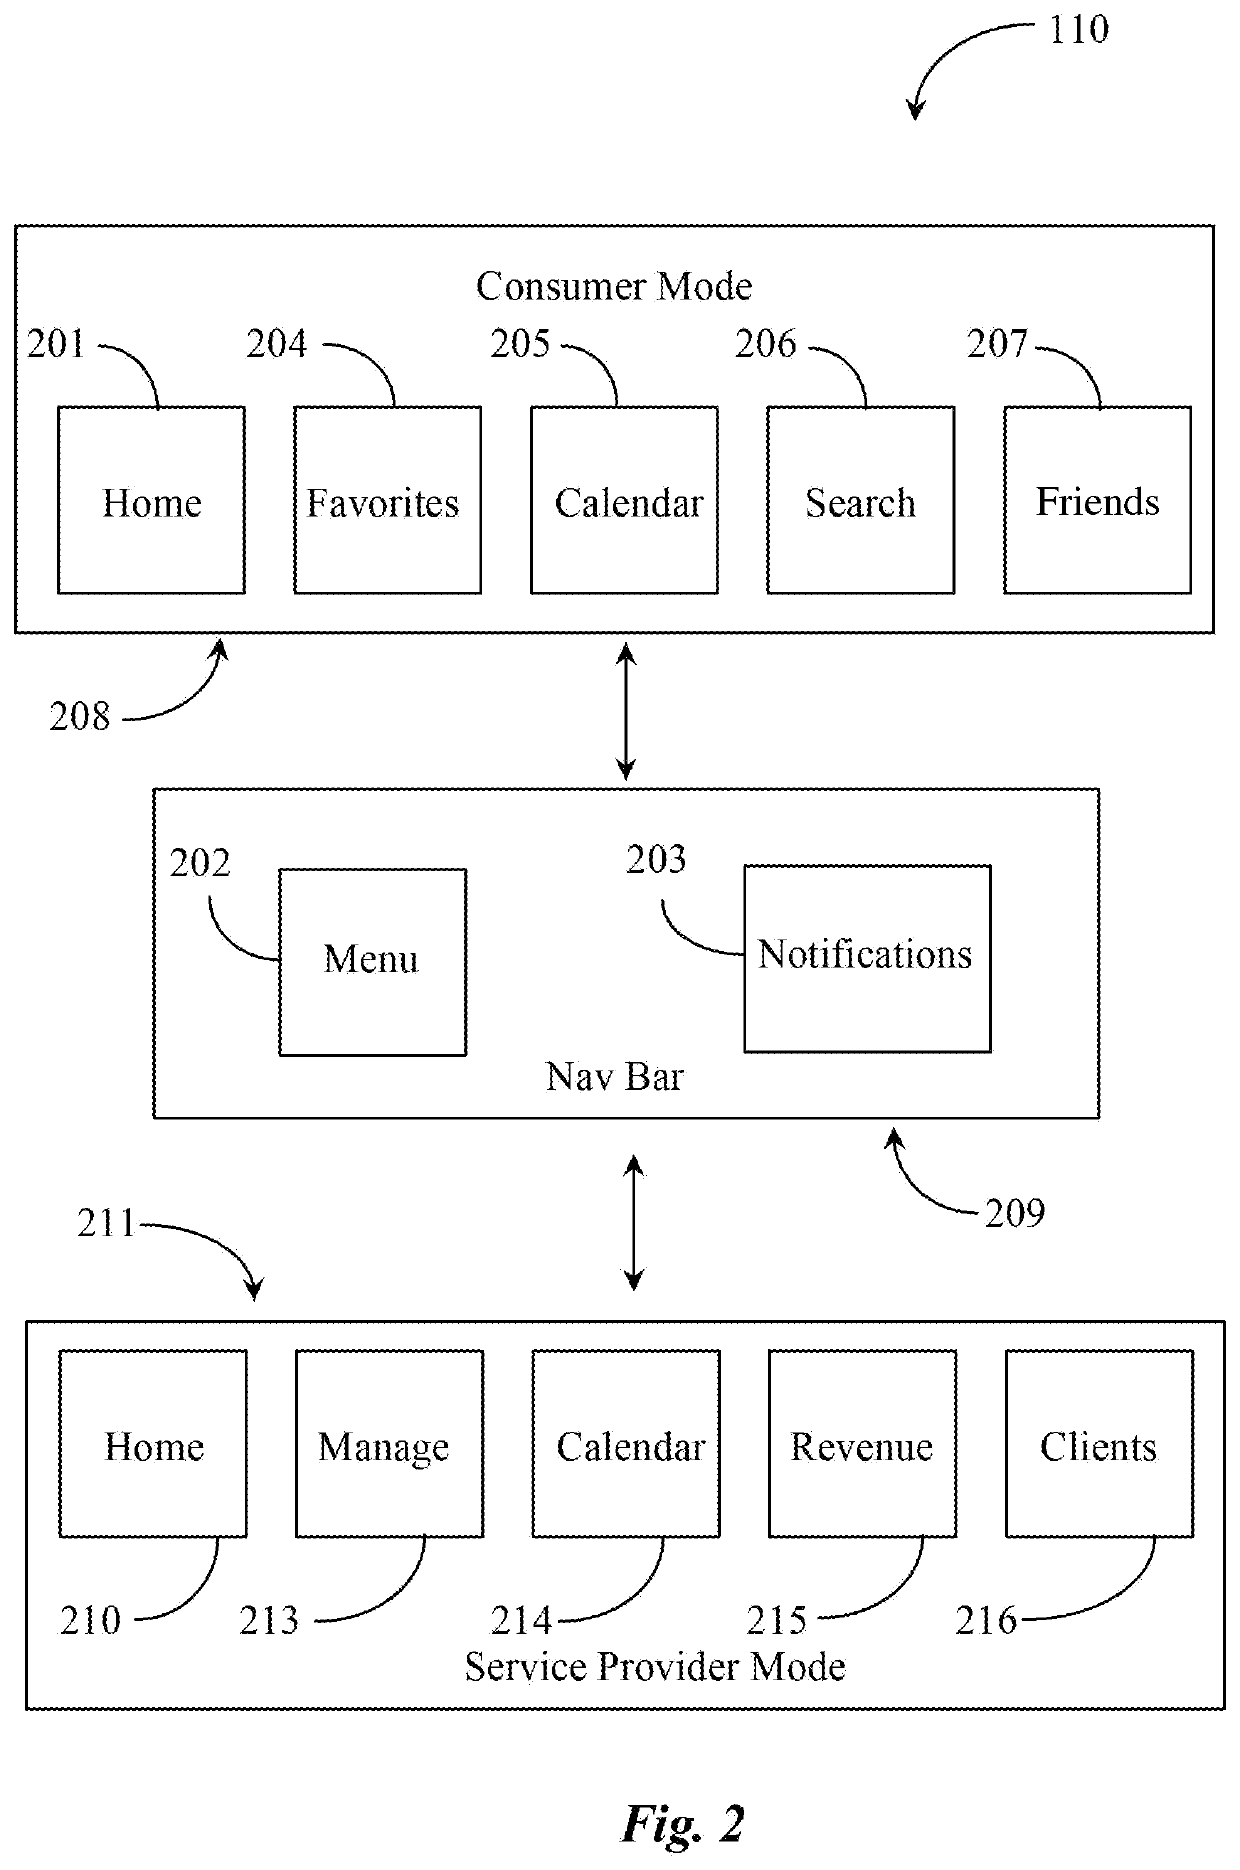 Server supported mobile application for scheduling or conducting transactions